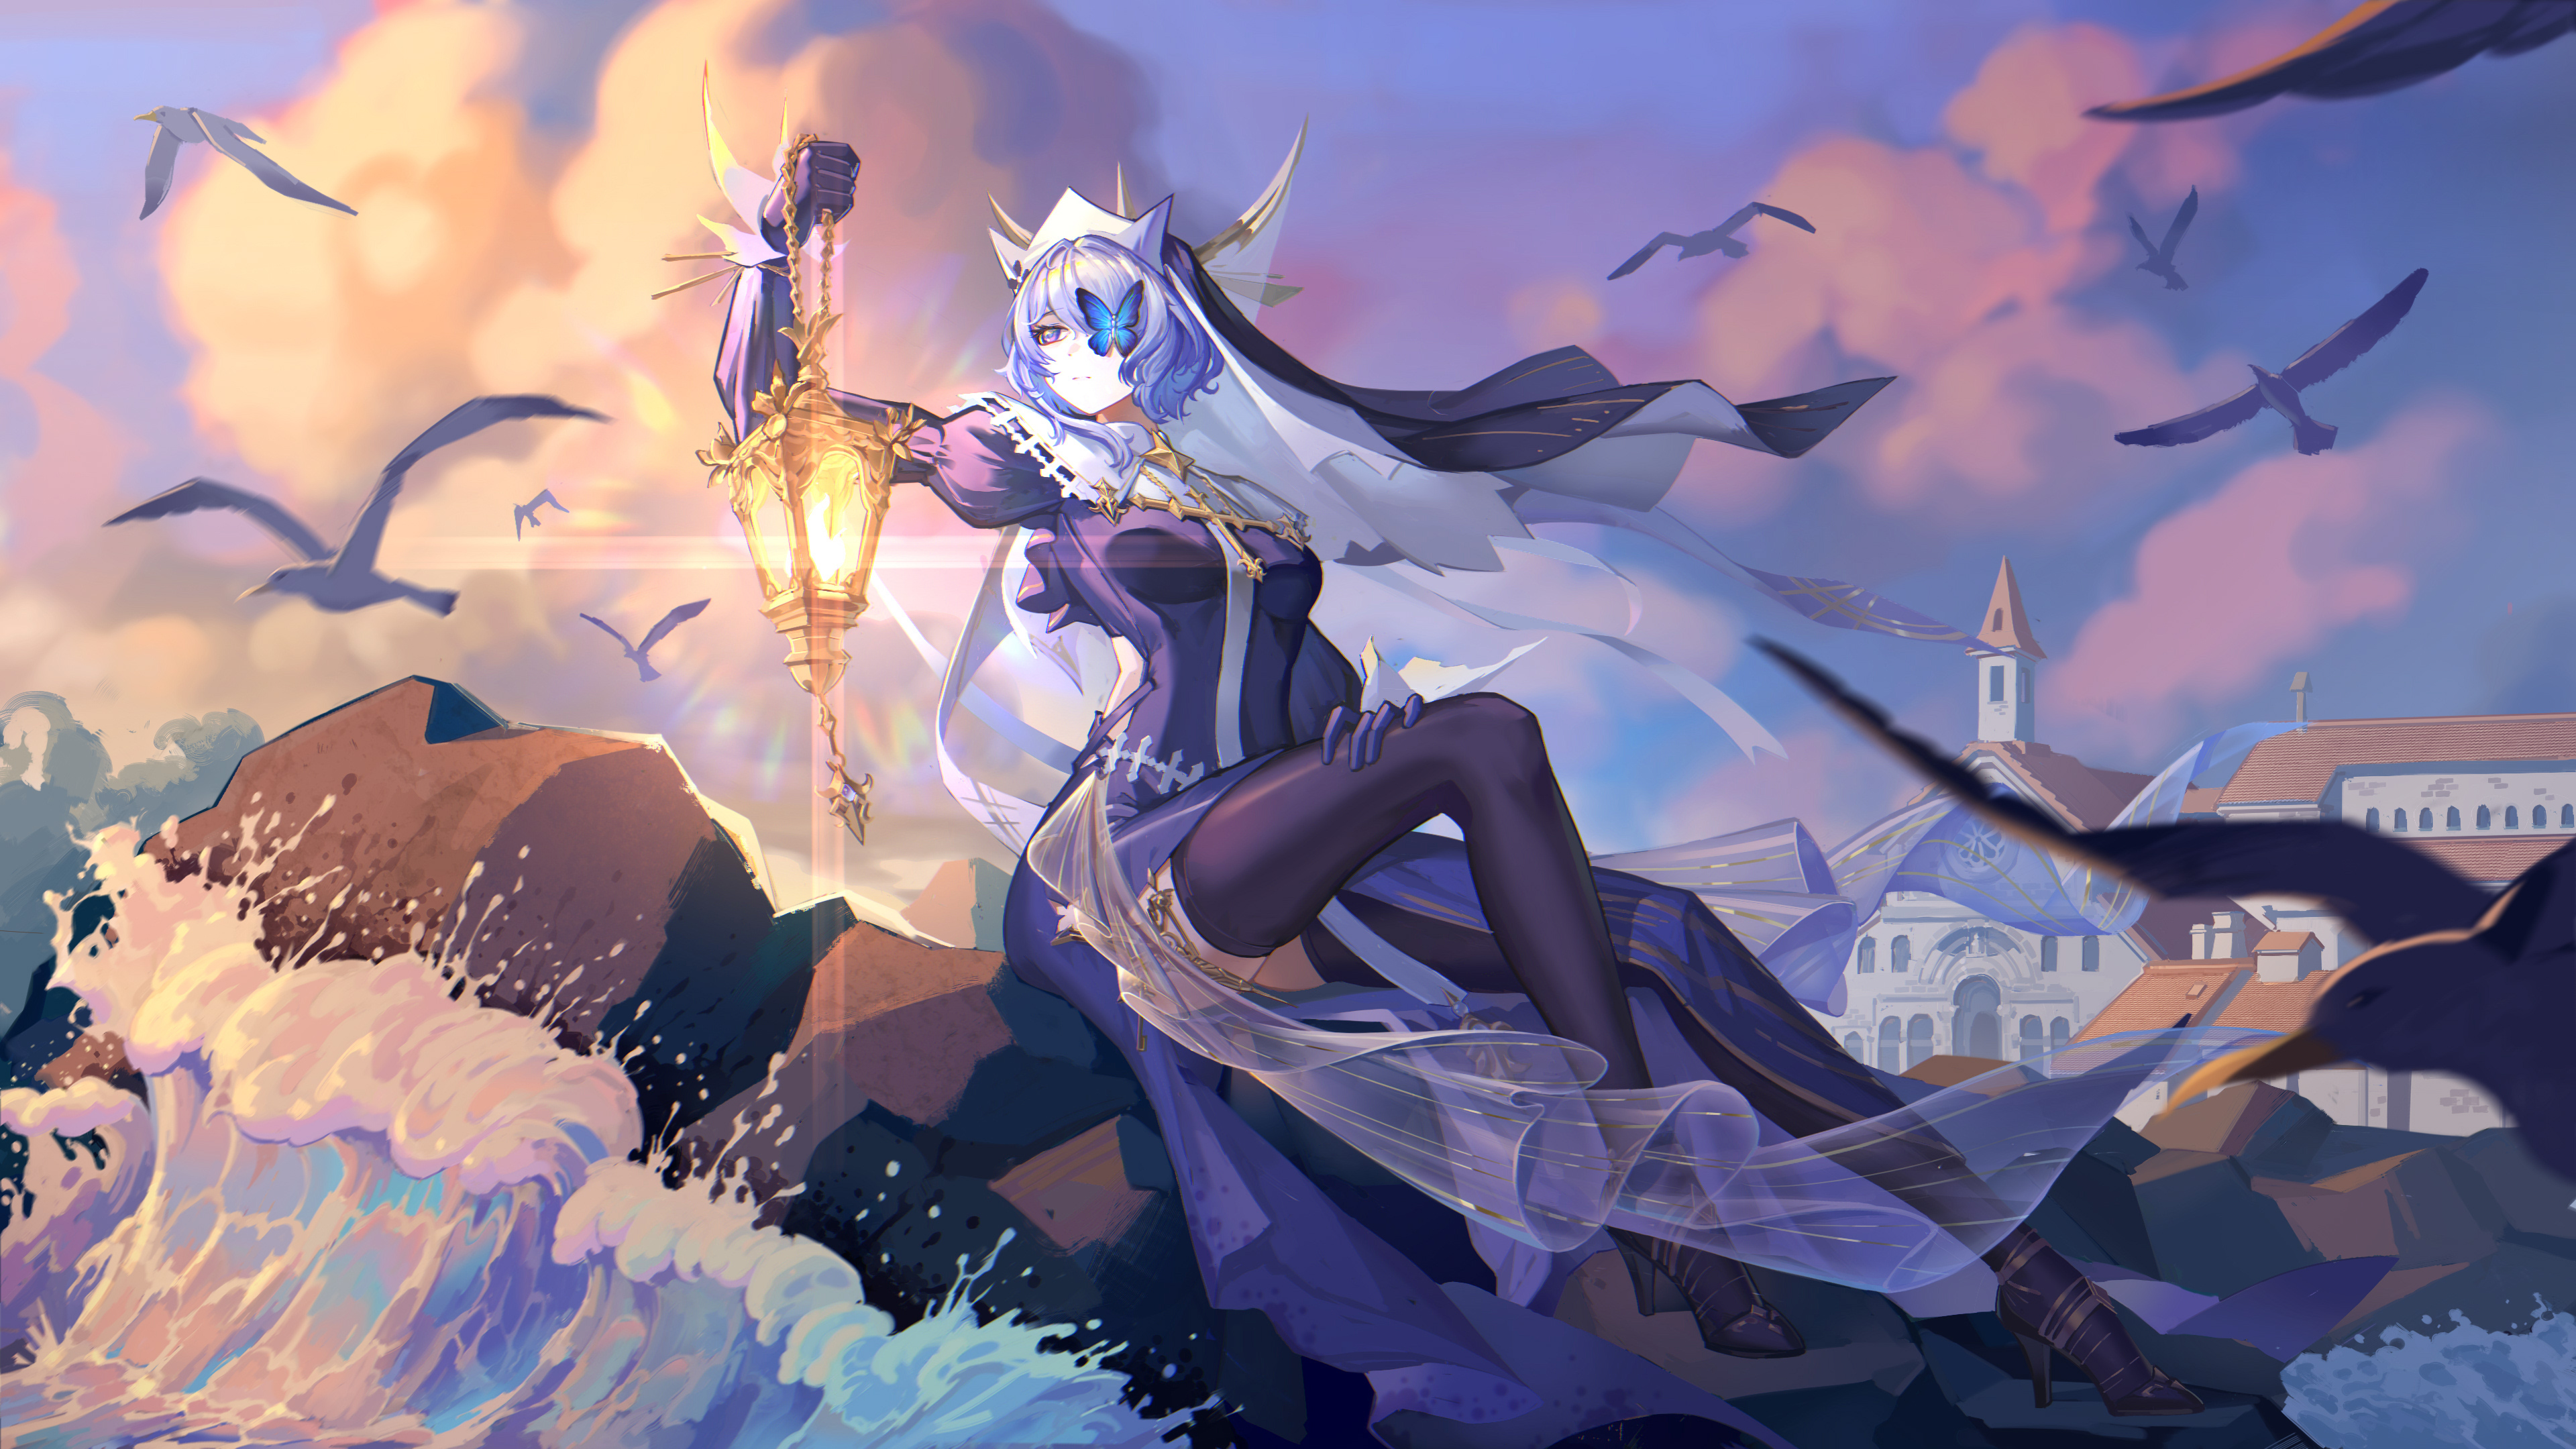 Anime 3840x2160 Arknights looking away Whisperain (Arknights) sea looking sideways animals sunset women outdoors depth of field purple hair purple eyes architecture closed mouth seagulls Zangfang long sleeves Blue Butterflies waves blue dress blue gloves sitting black thigh-highs lantern blurry background one eye obstructed birds rocks sky clouds anime girls high heels one arm up evening water butterfly orange sky outdoors